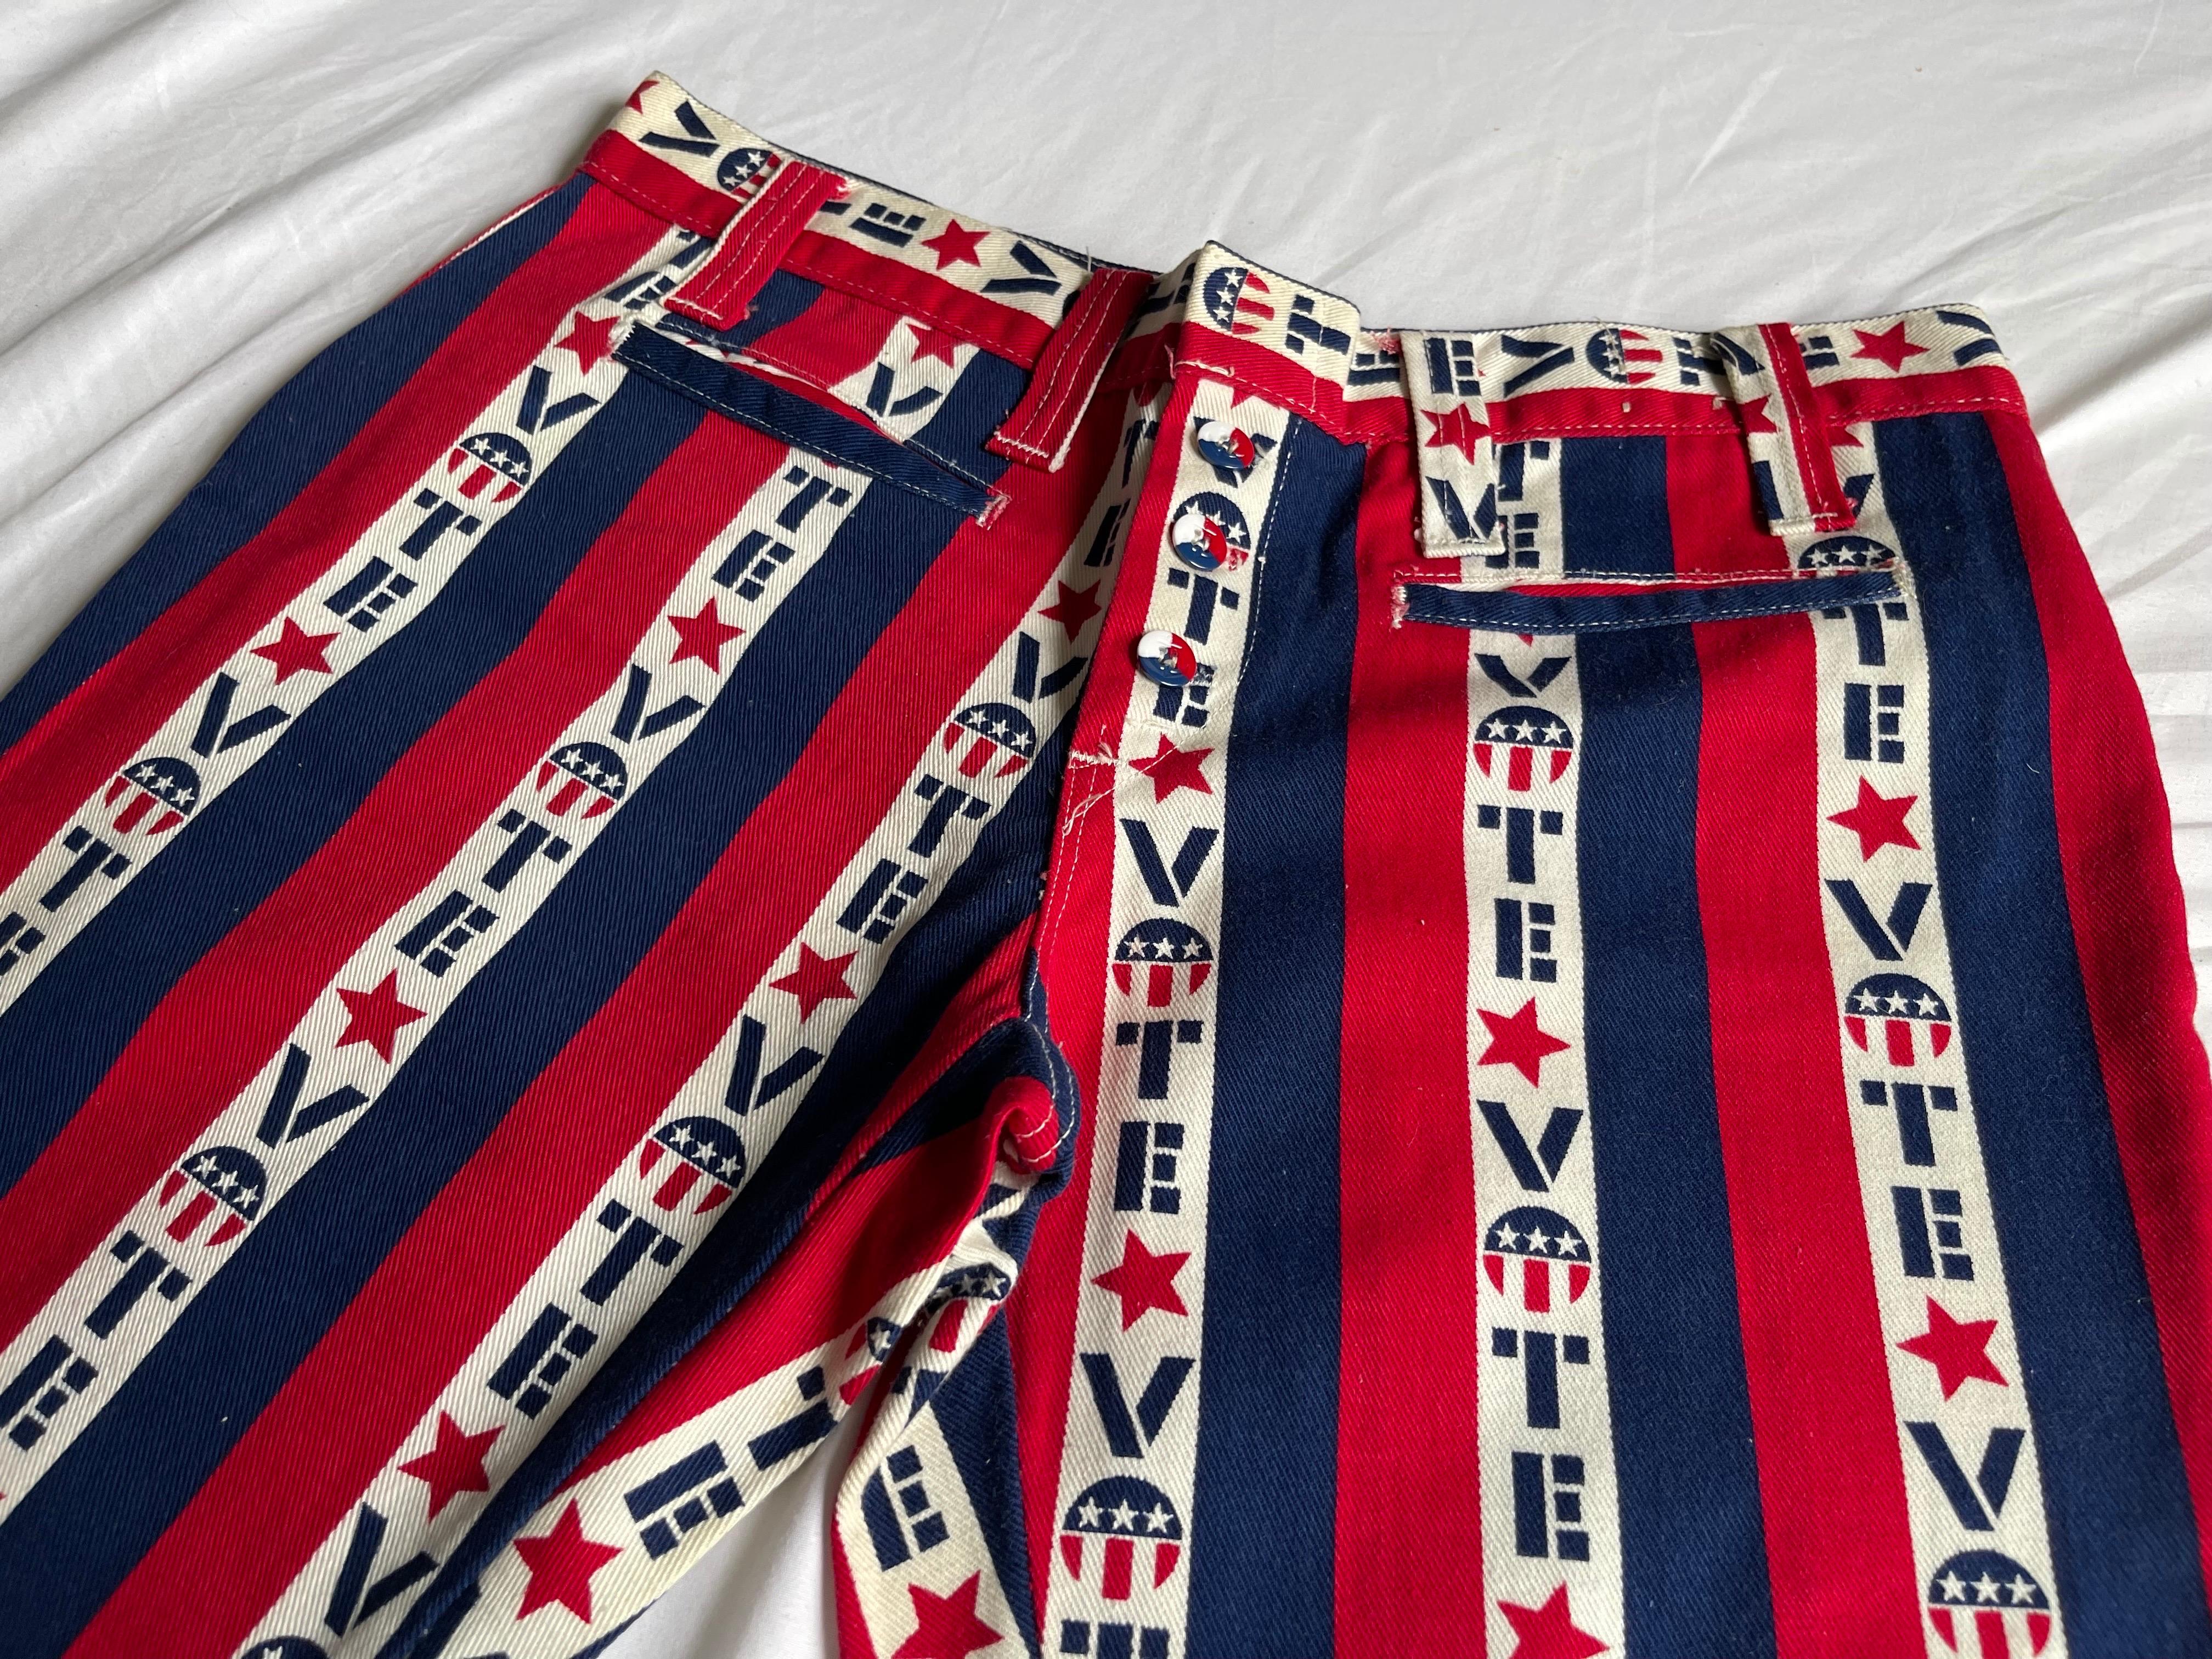 Vintage 1970s men's patriotic red, white & blue 'vote' cotton flared bell bottoms - new old stock - these were never used. The owner just washed them once and put them away. Great piece of original Americana history in excellent unused condition. 
